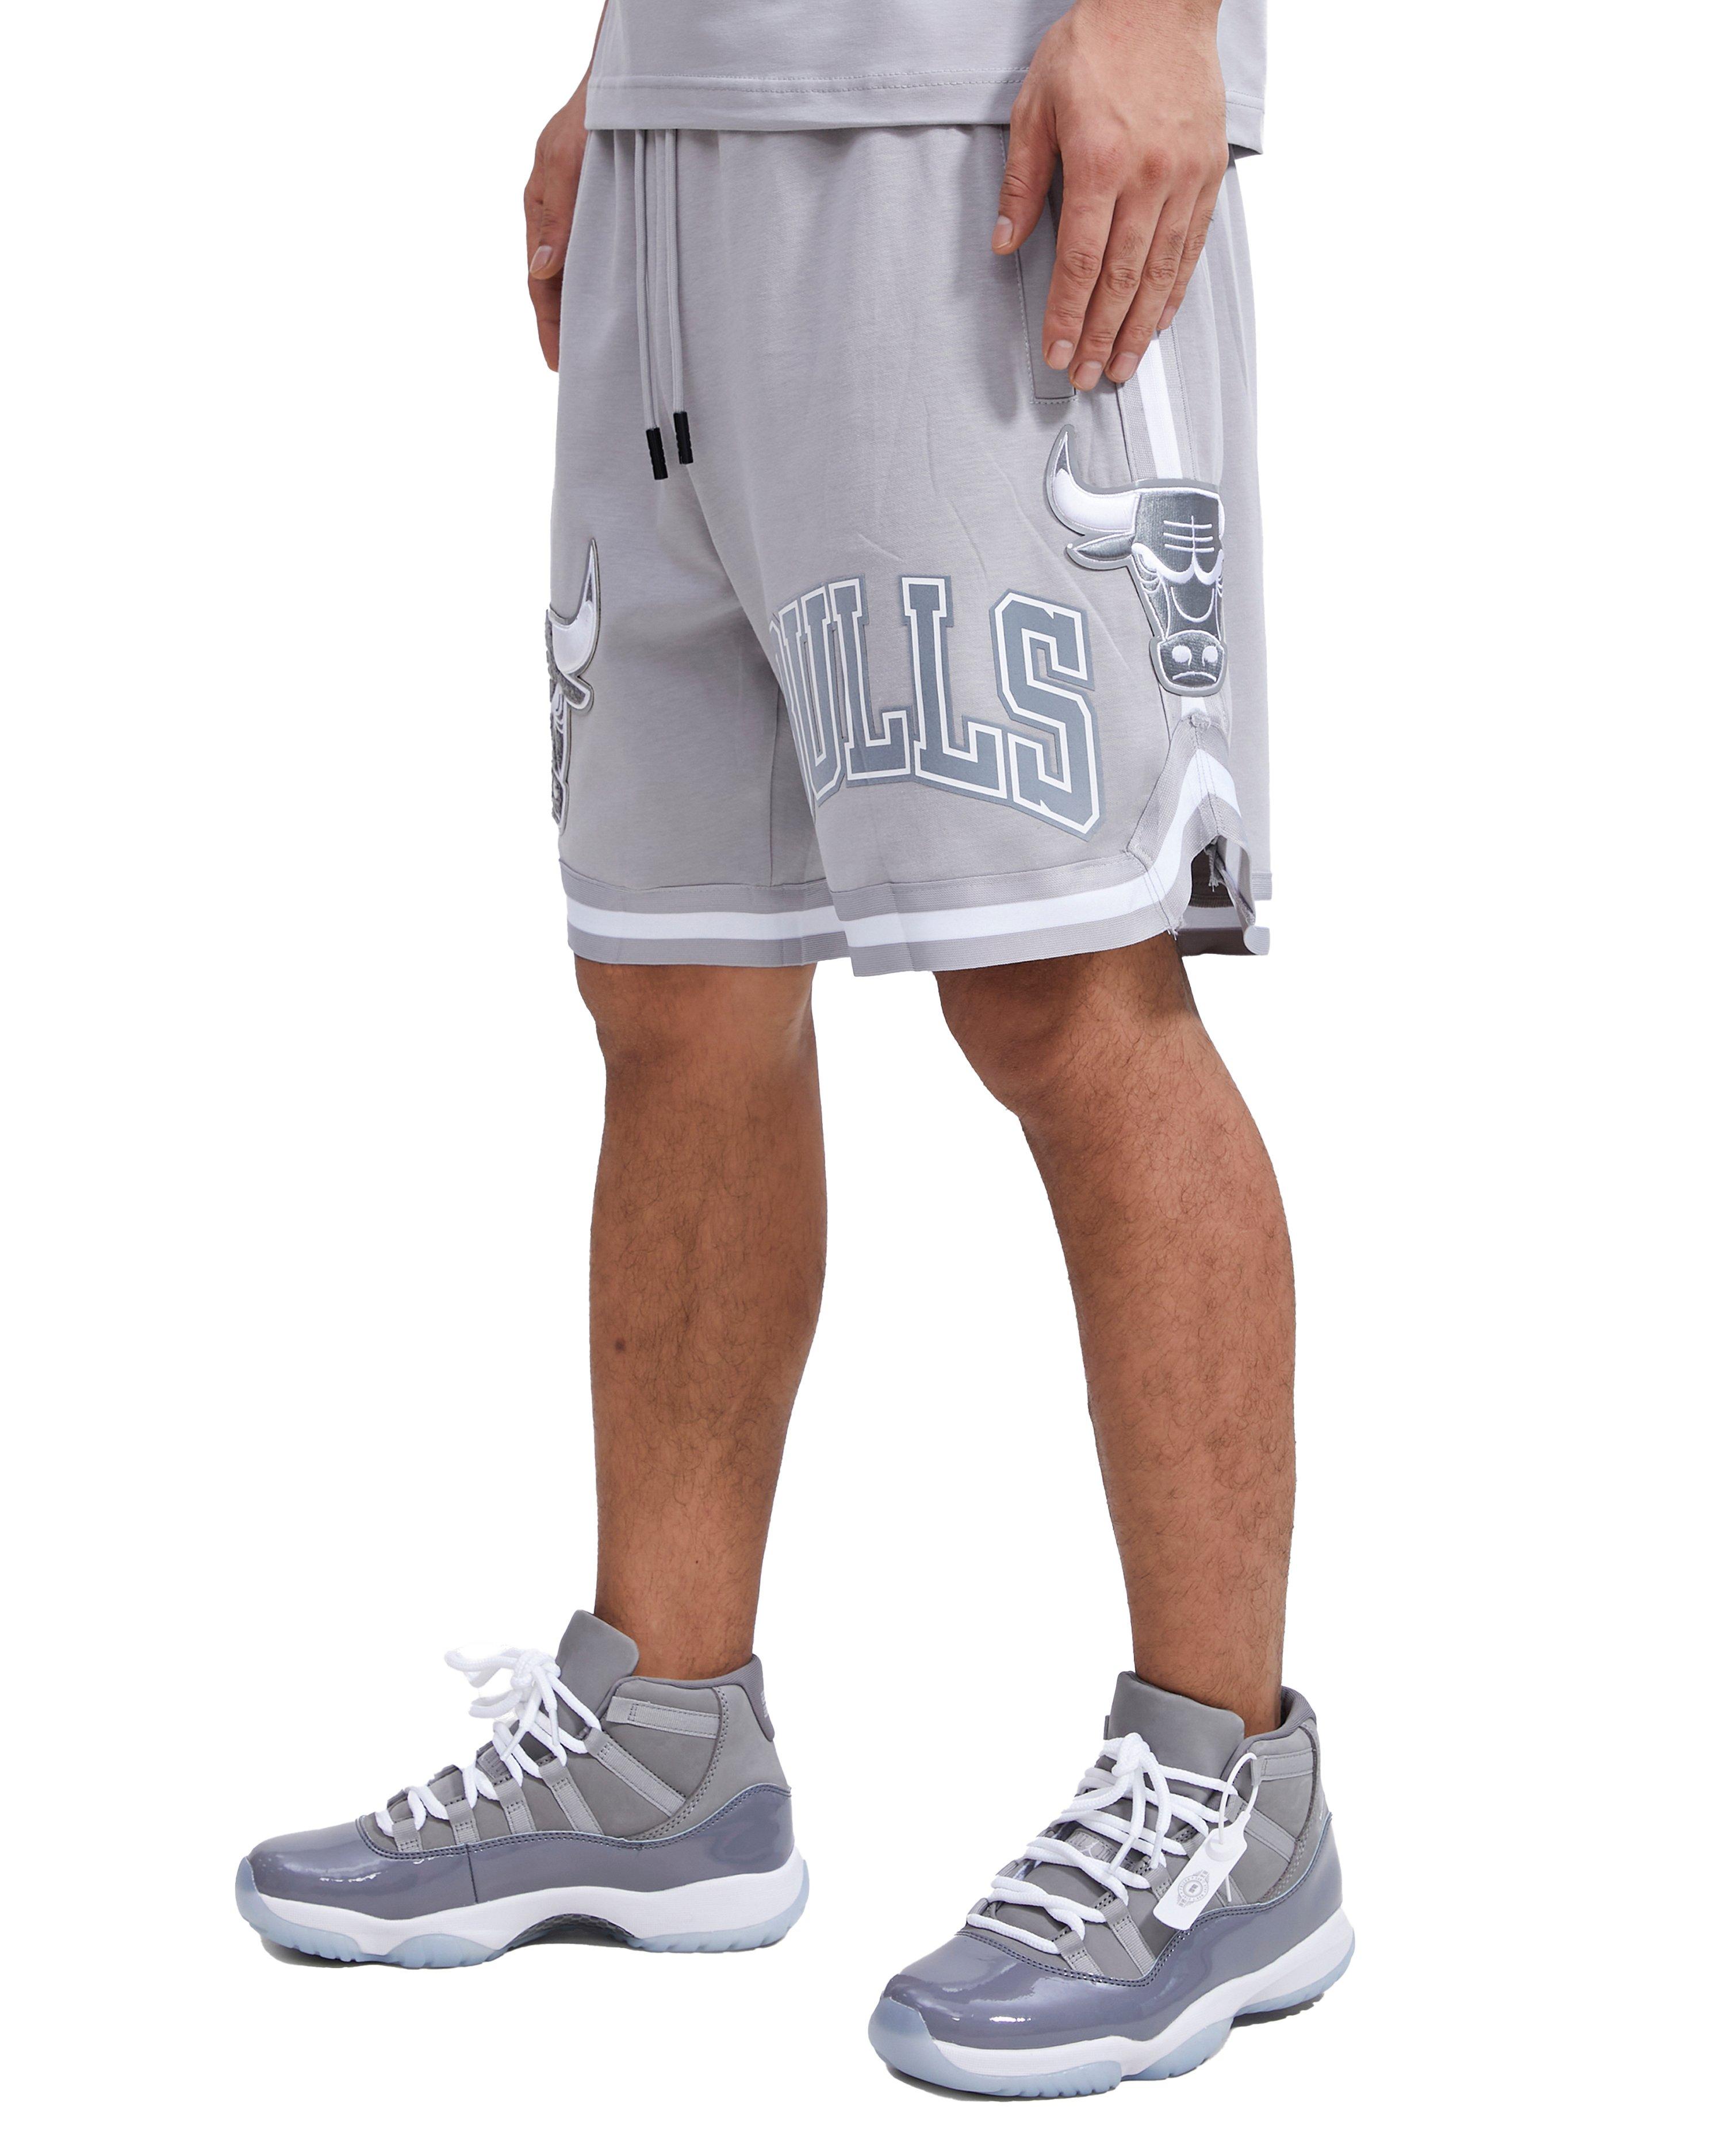 Chicago Bulls Cool Grey 11 Patch Shorts